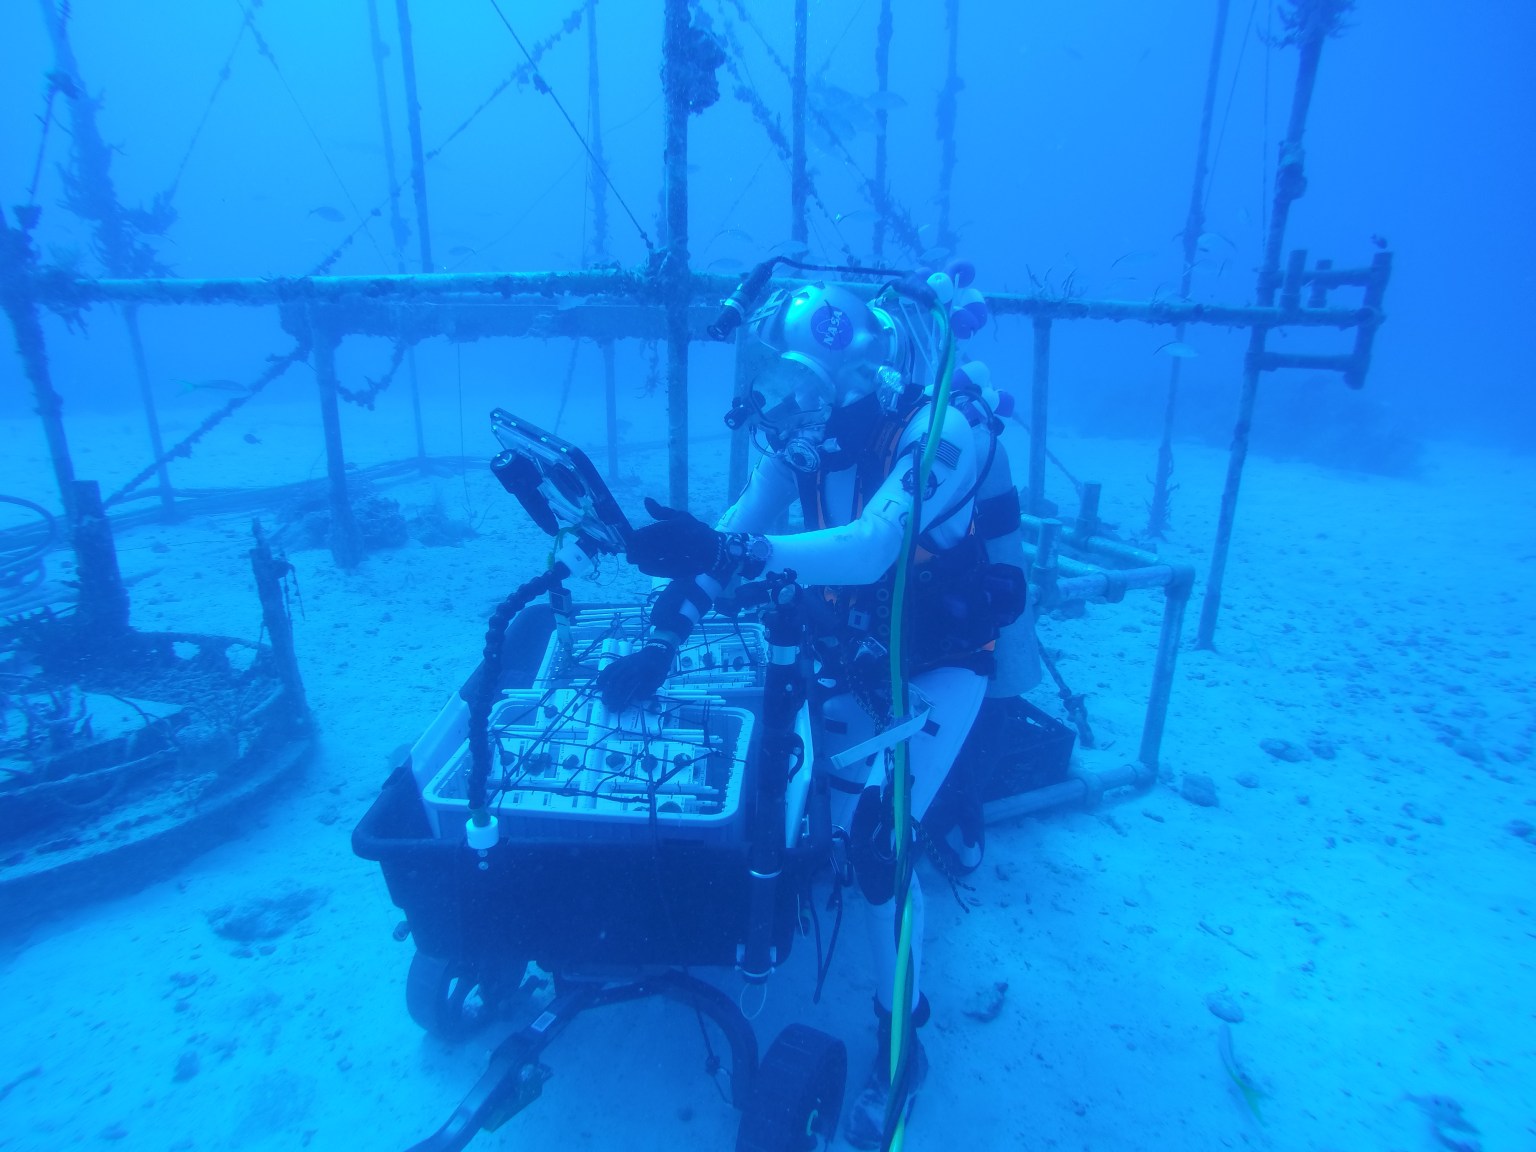 Aquanaut underwater working on a small machine in front of metal rigging.